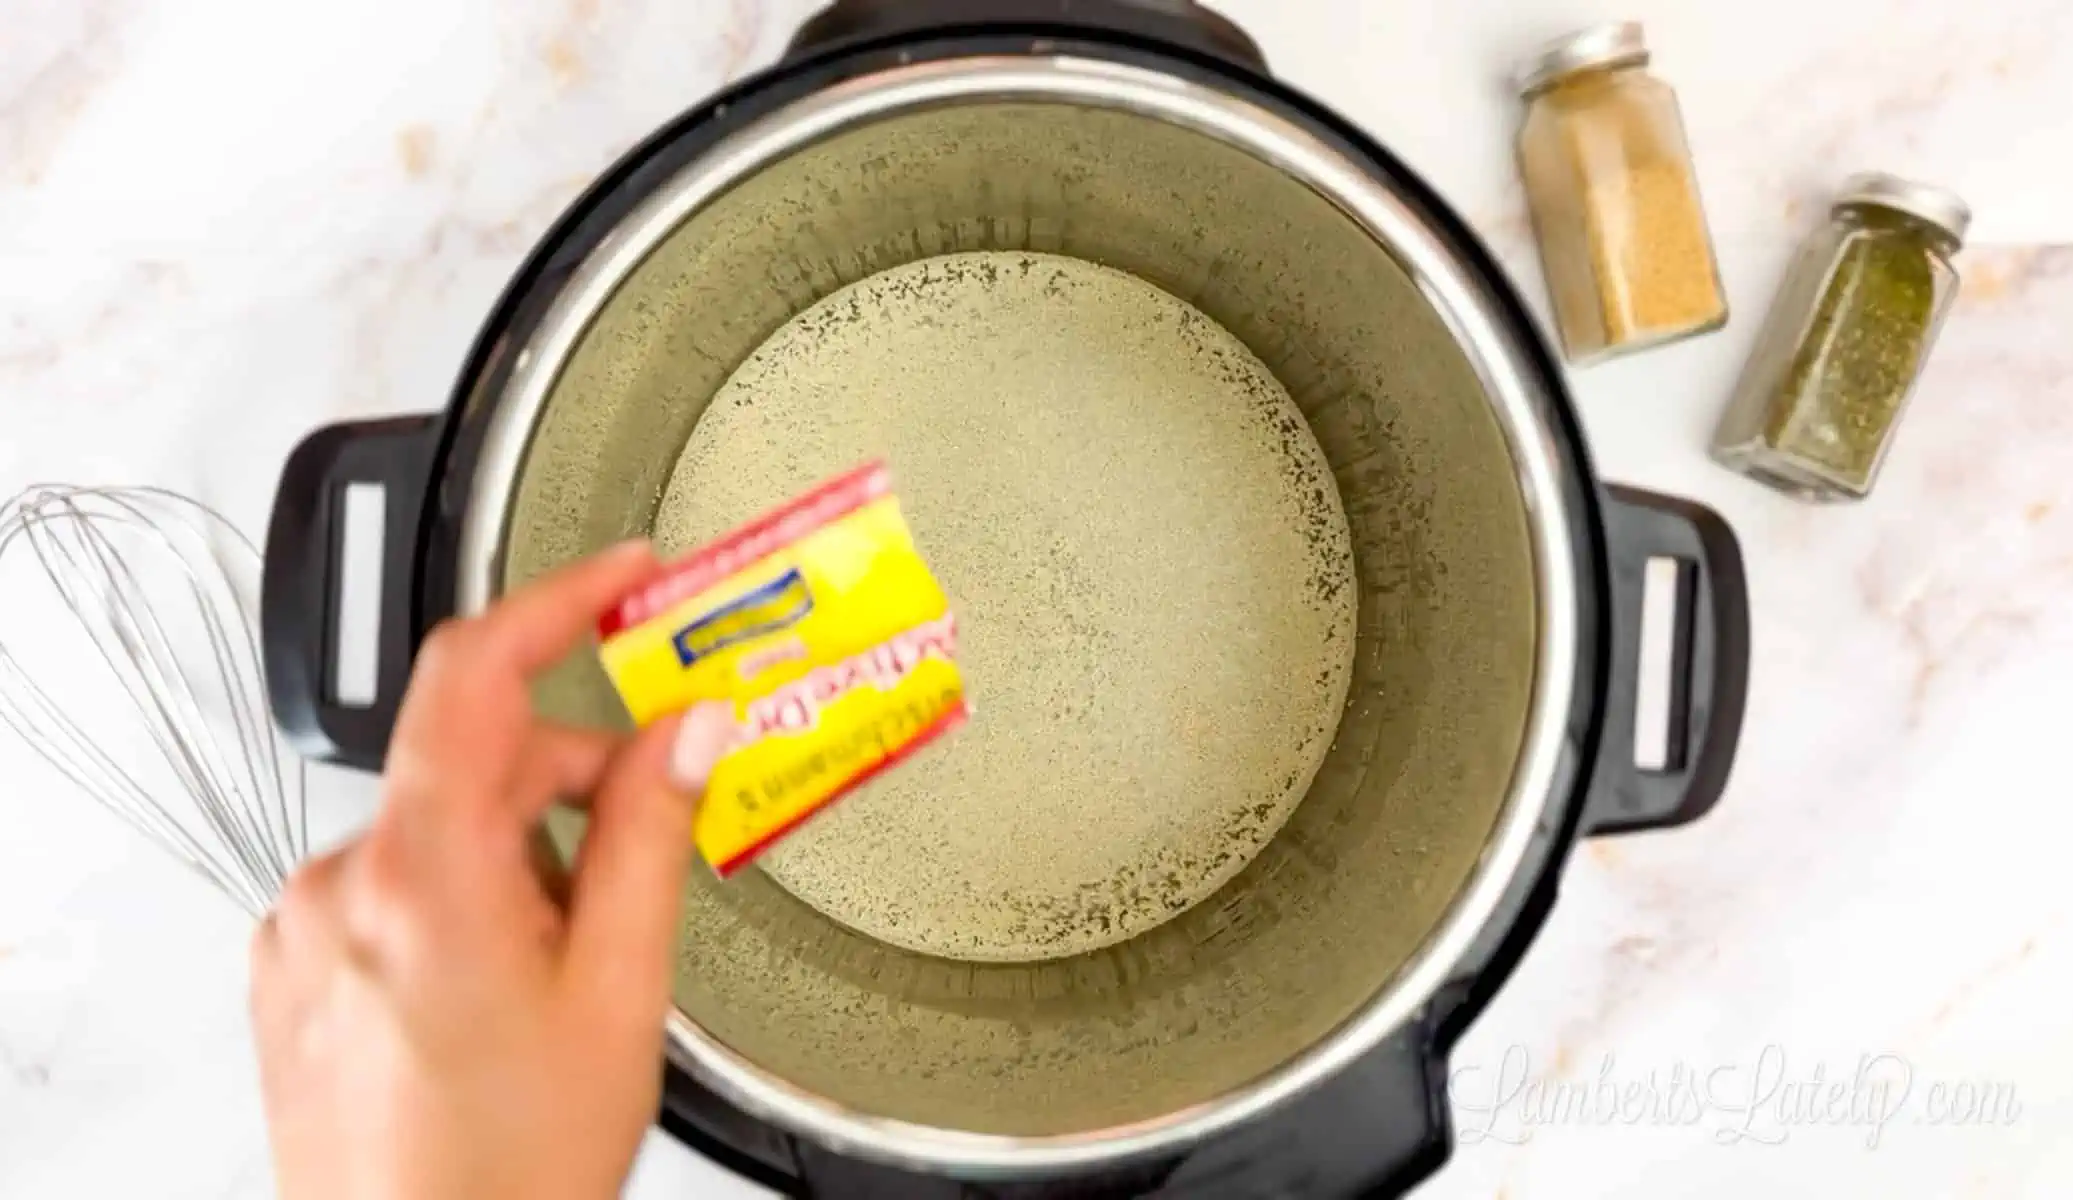 pouring yeast in an instant pot.